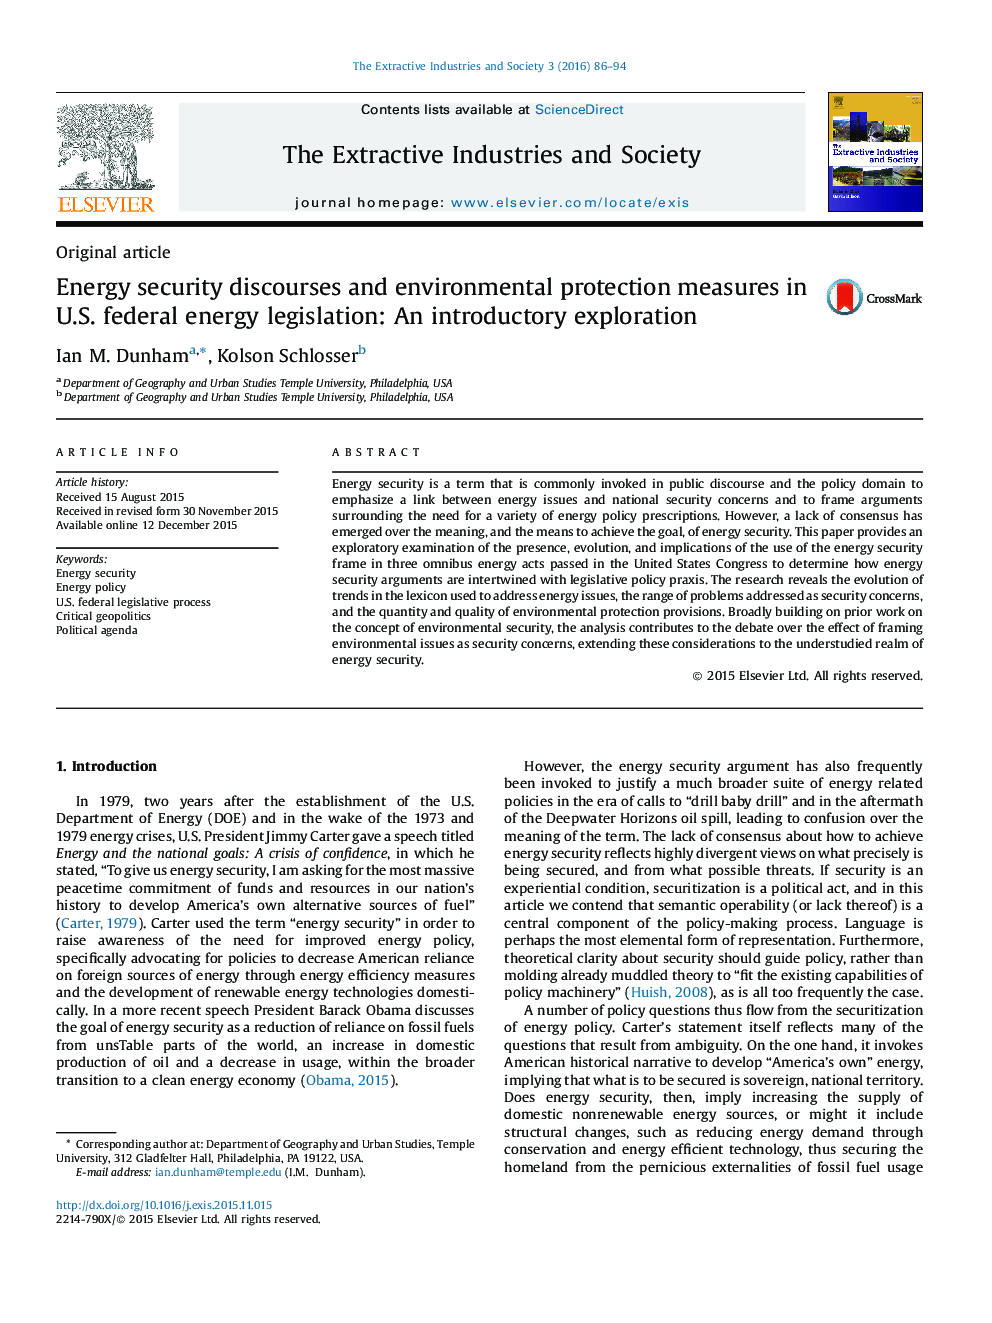 Energy security discourses and environmental protection measures in U.S. federal energy legislation: An introductory exploration